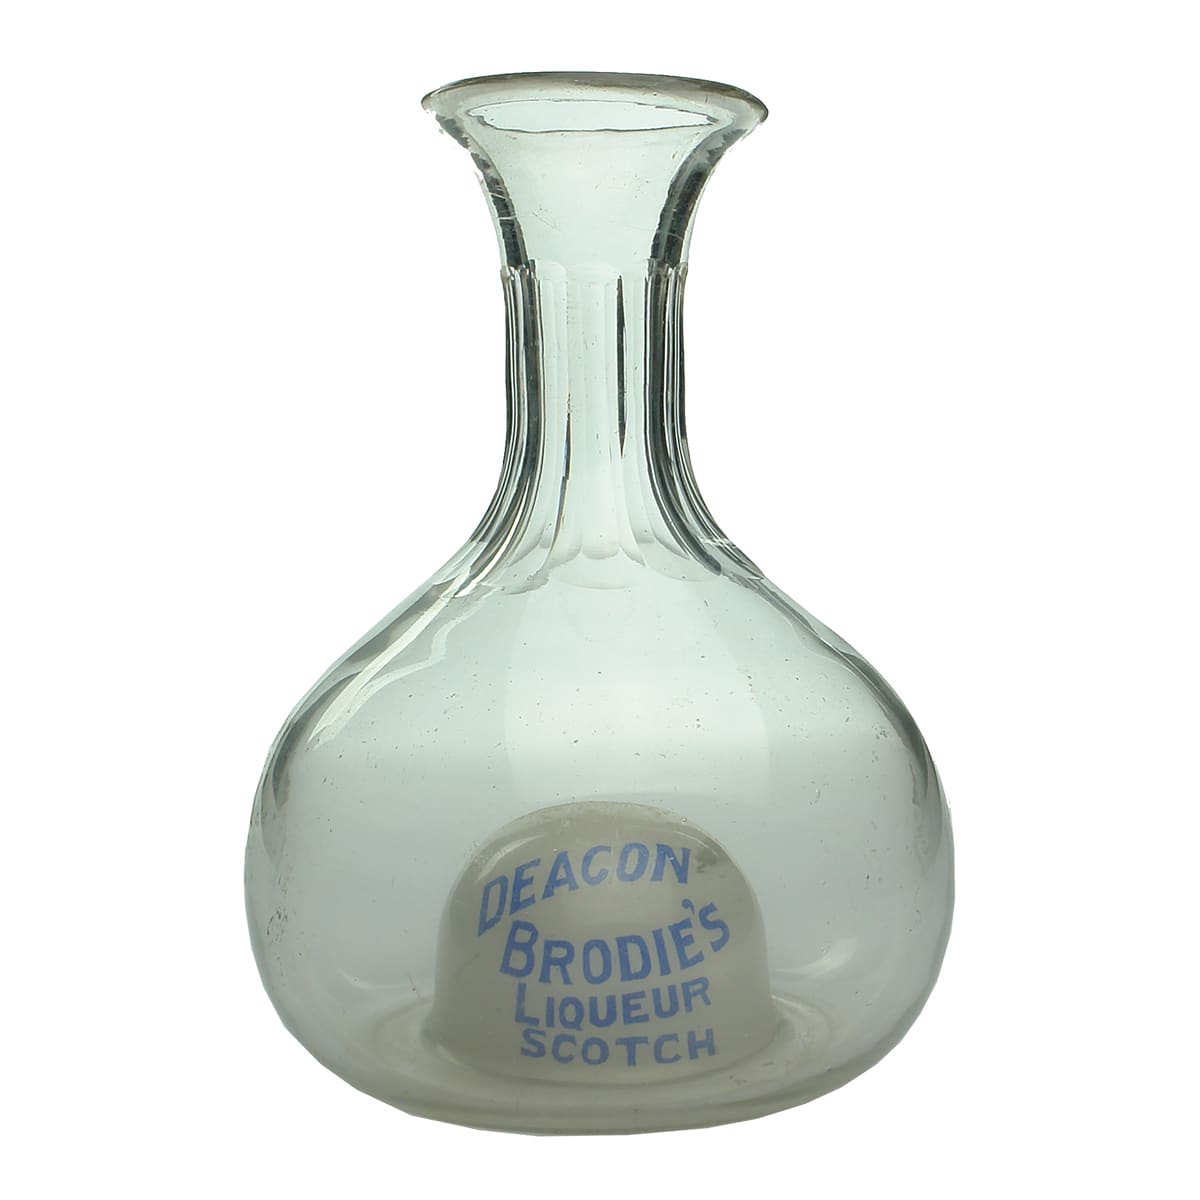 Water Carafe. Deacon Brodie's Liqueur Scotch. Argyll & Sutherland Highlanders. Clear. Blue & White print.